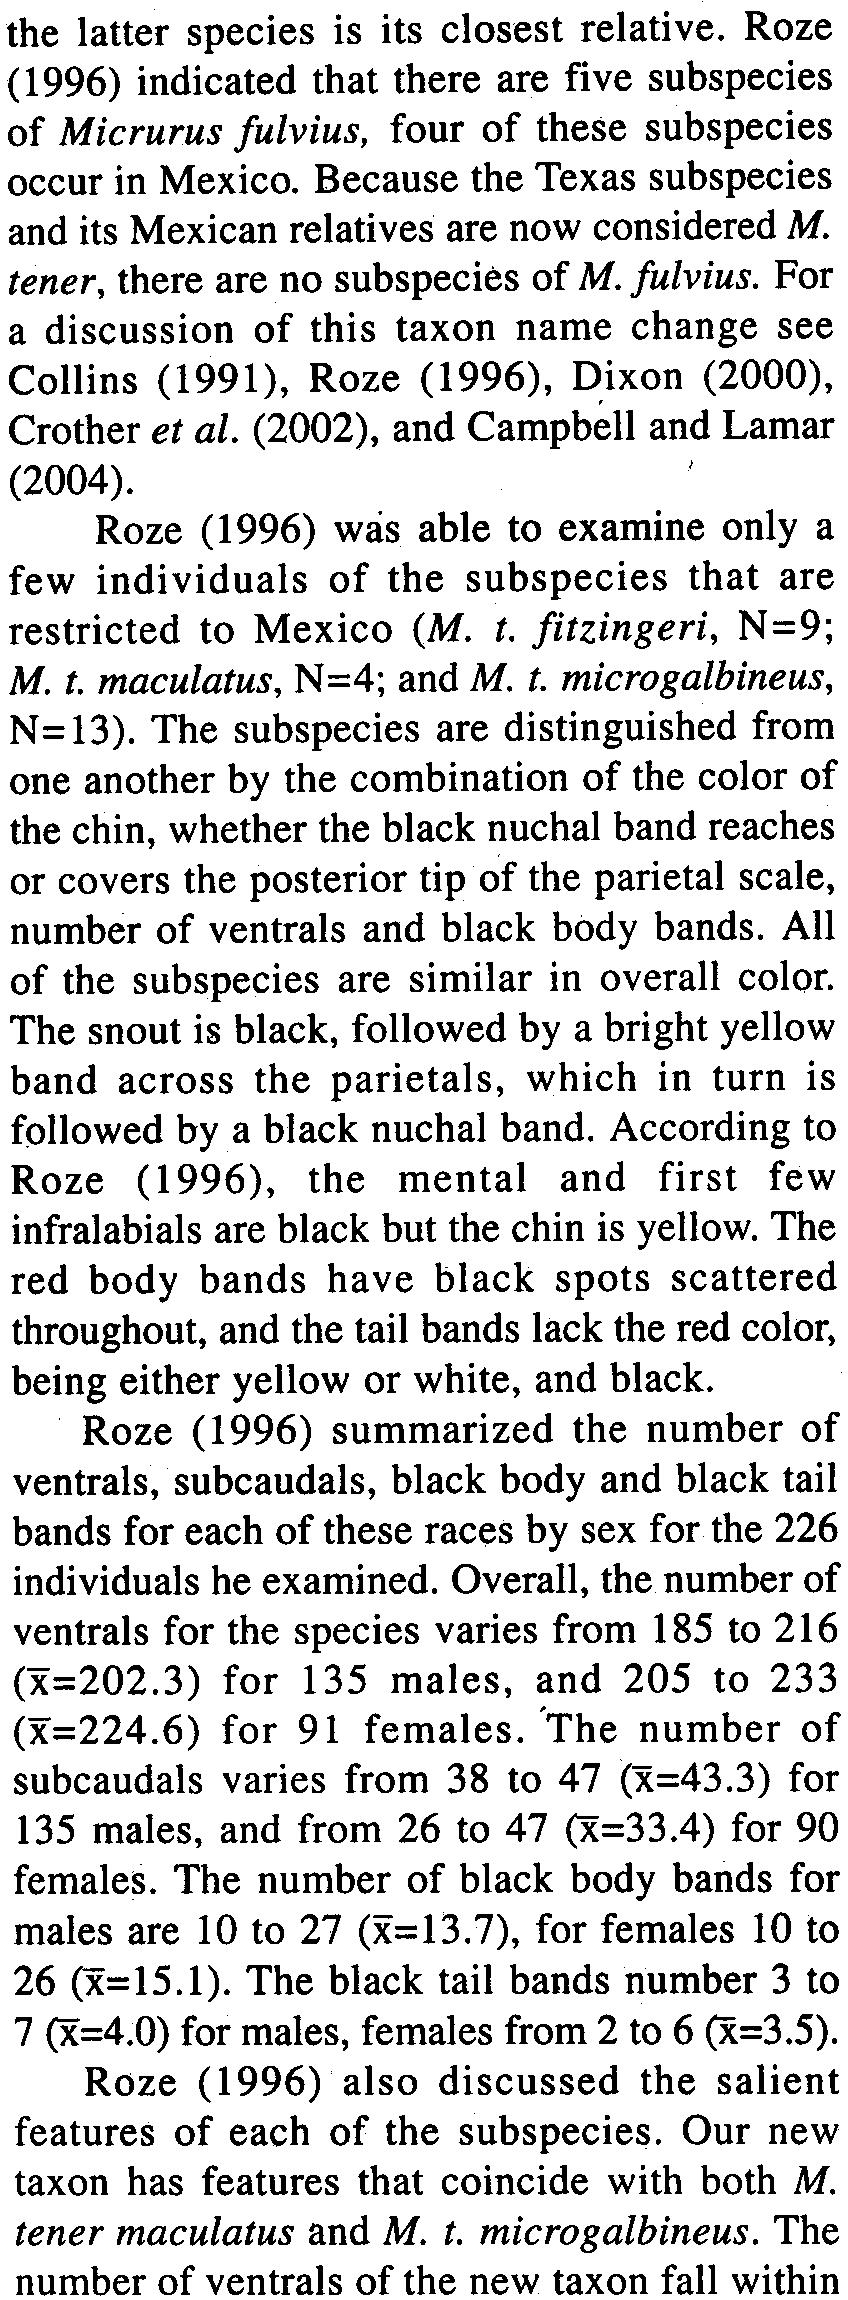 The subspecies are distinguished from one another by the combination of the color of the chin, whether the black nuchal band reaches or covers the posterior tip of the parietal scale, number of